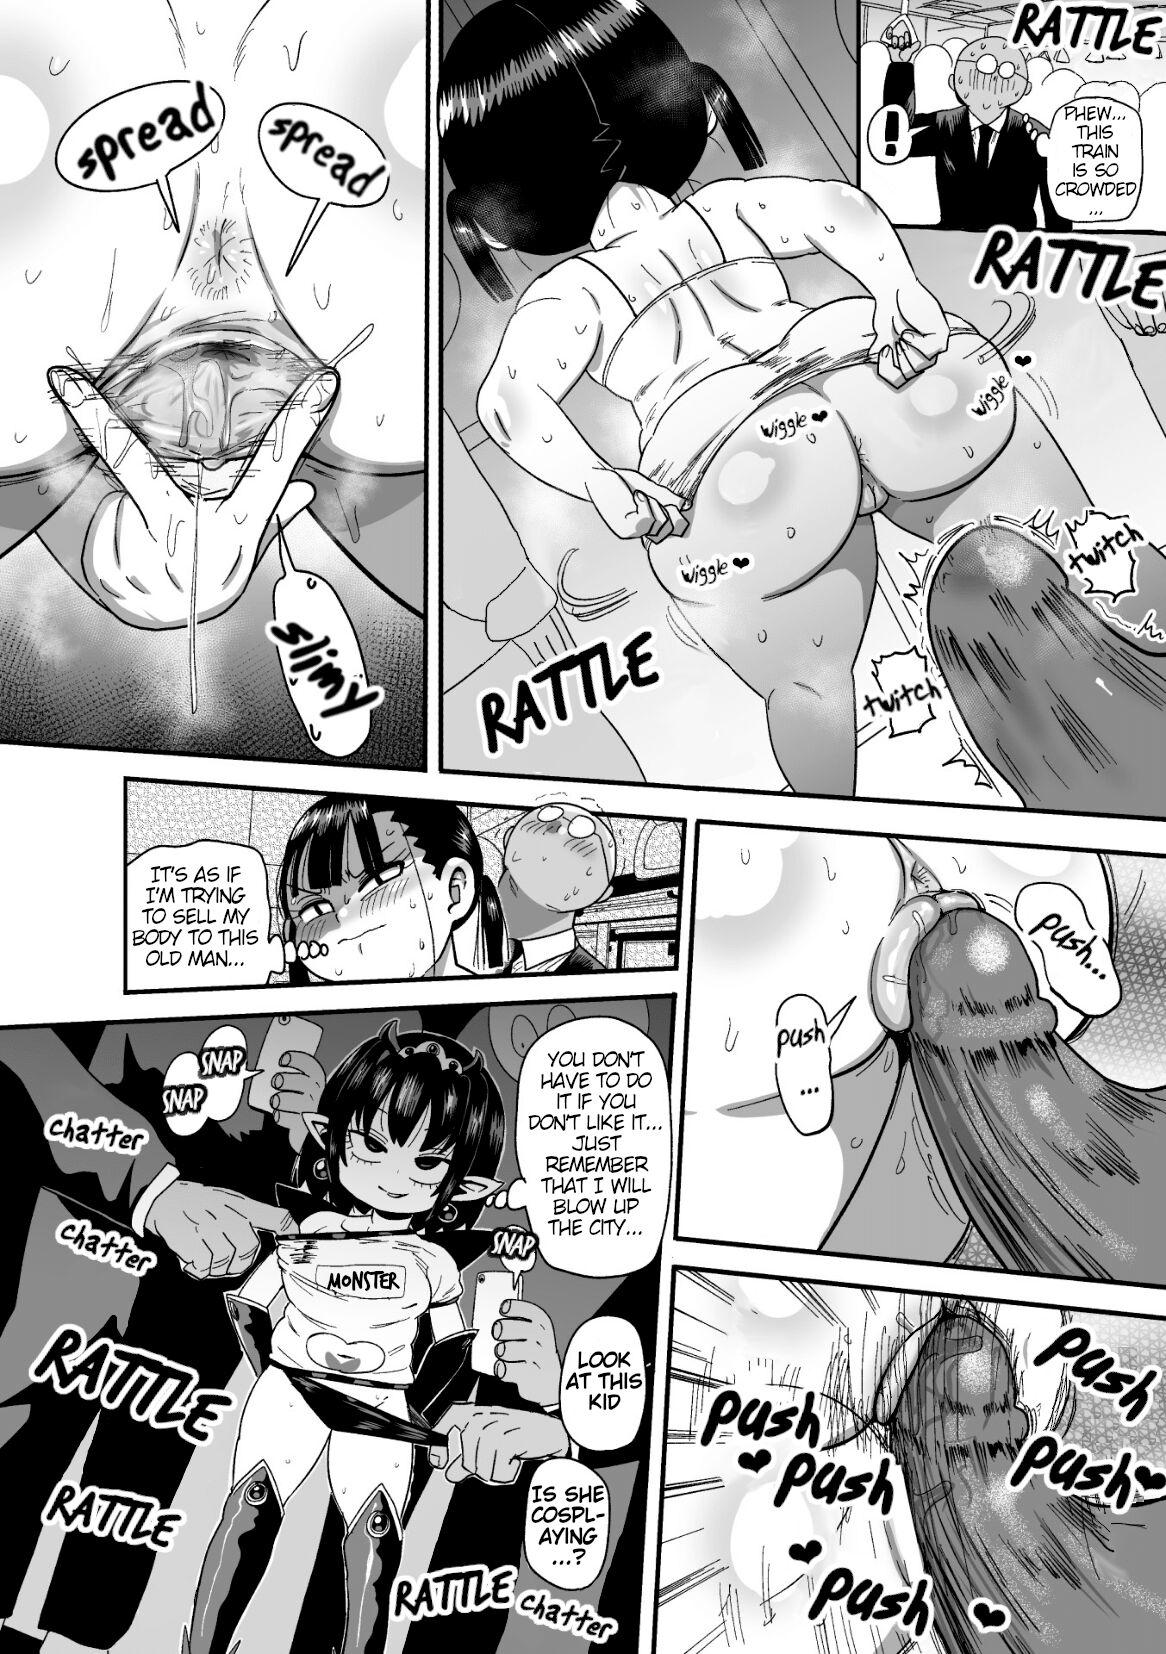 Thick Magical Girl In Training - Ana Ch. 3 | Yousei no Mahou Shoujo Anna Ch. 3 - Original Strap On - Page 8